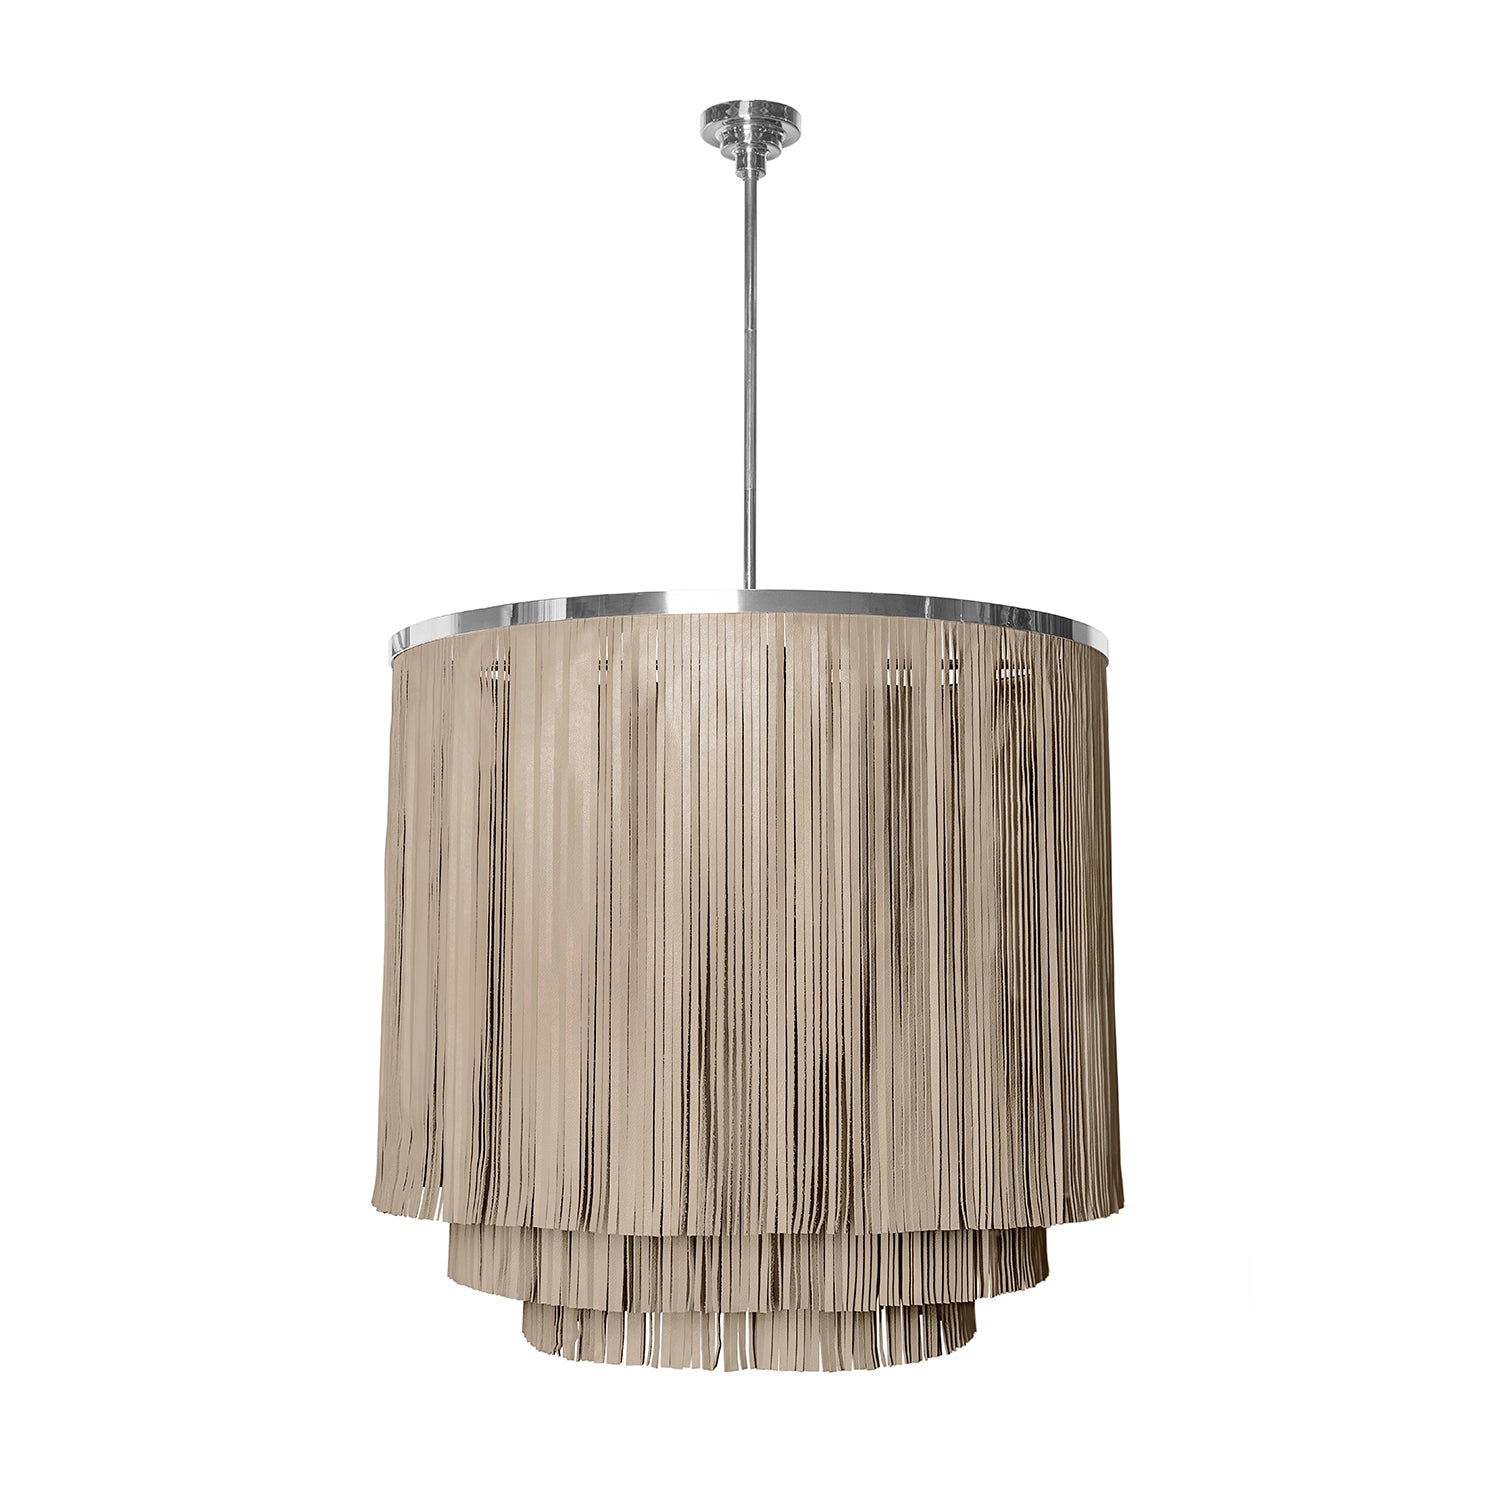 Large NeKeia Leather Chandelier in Nickel Finish and Cream-Stone Leather